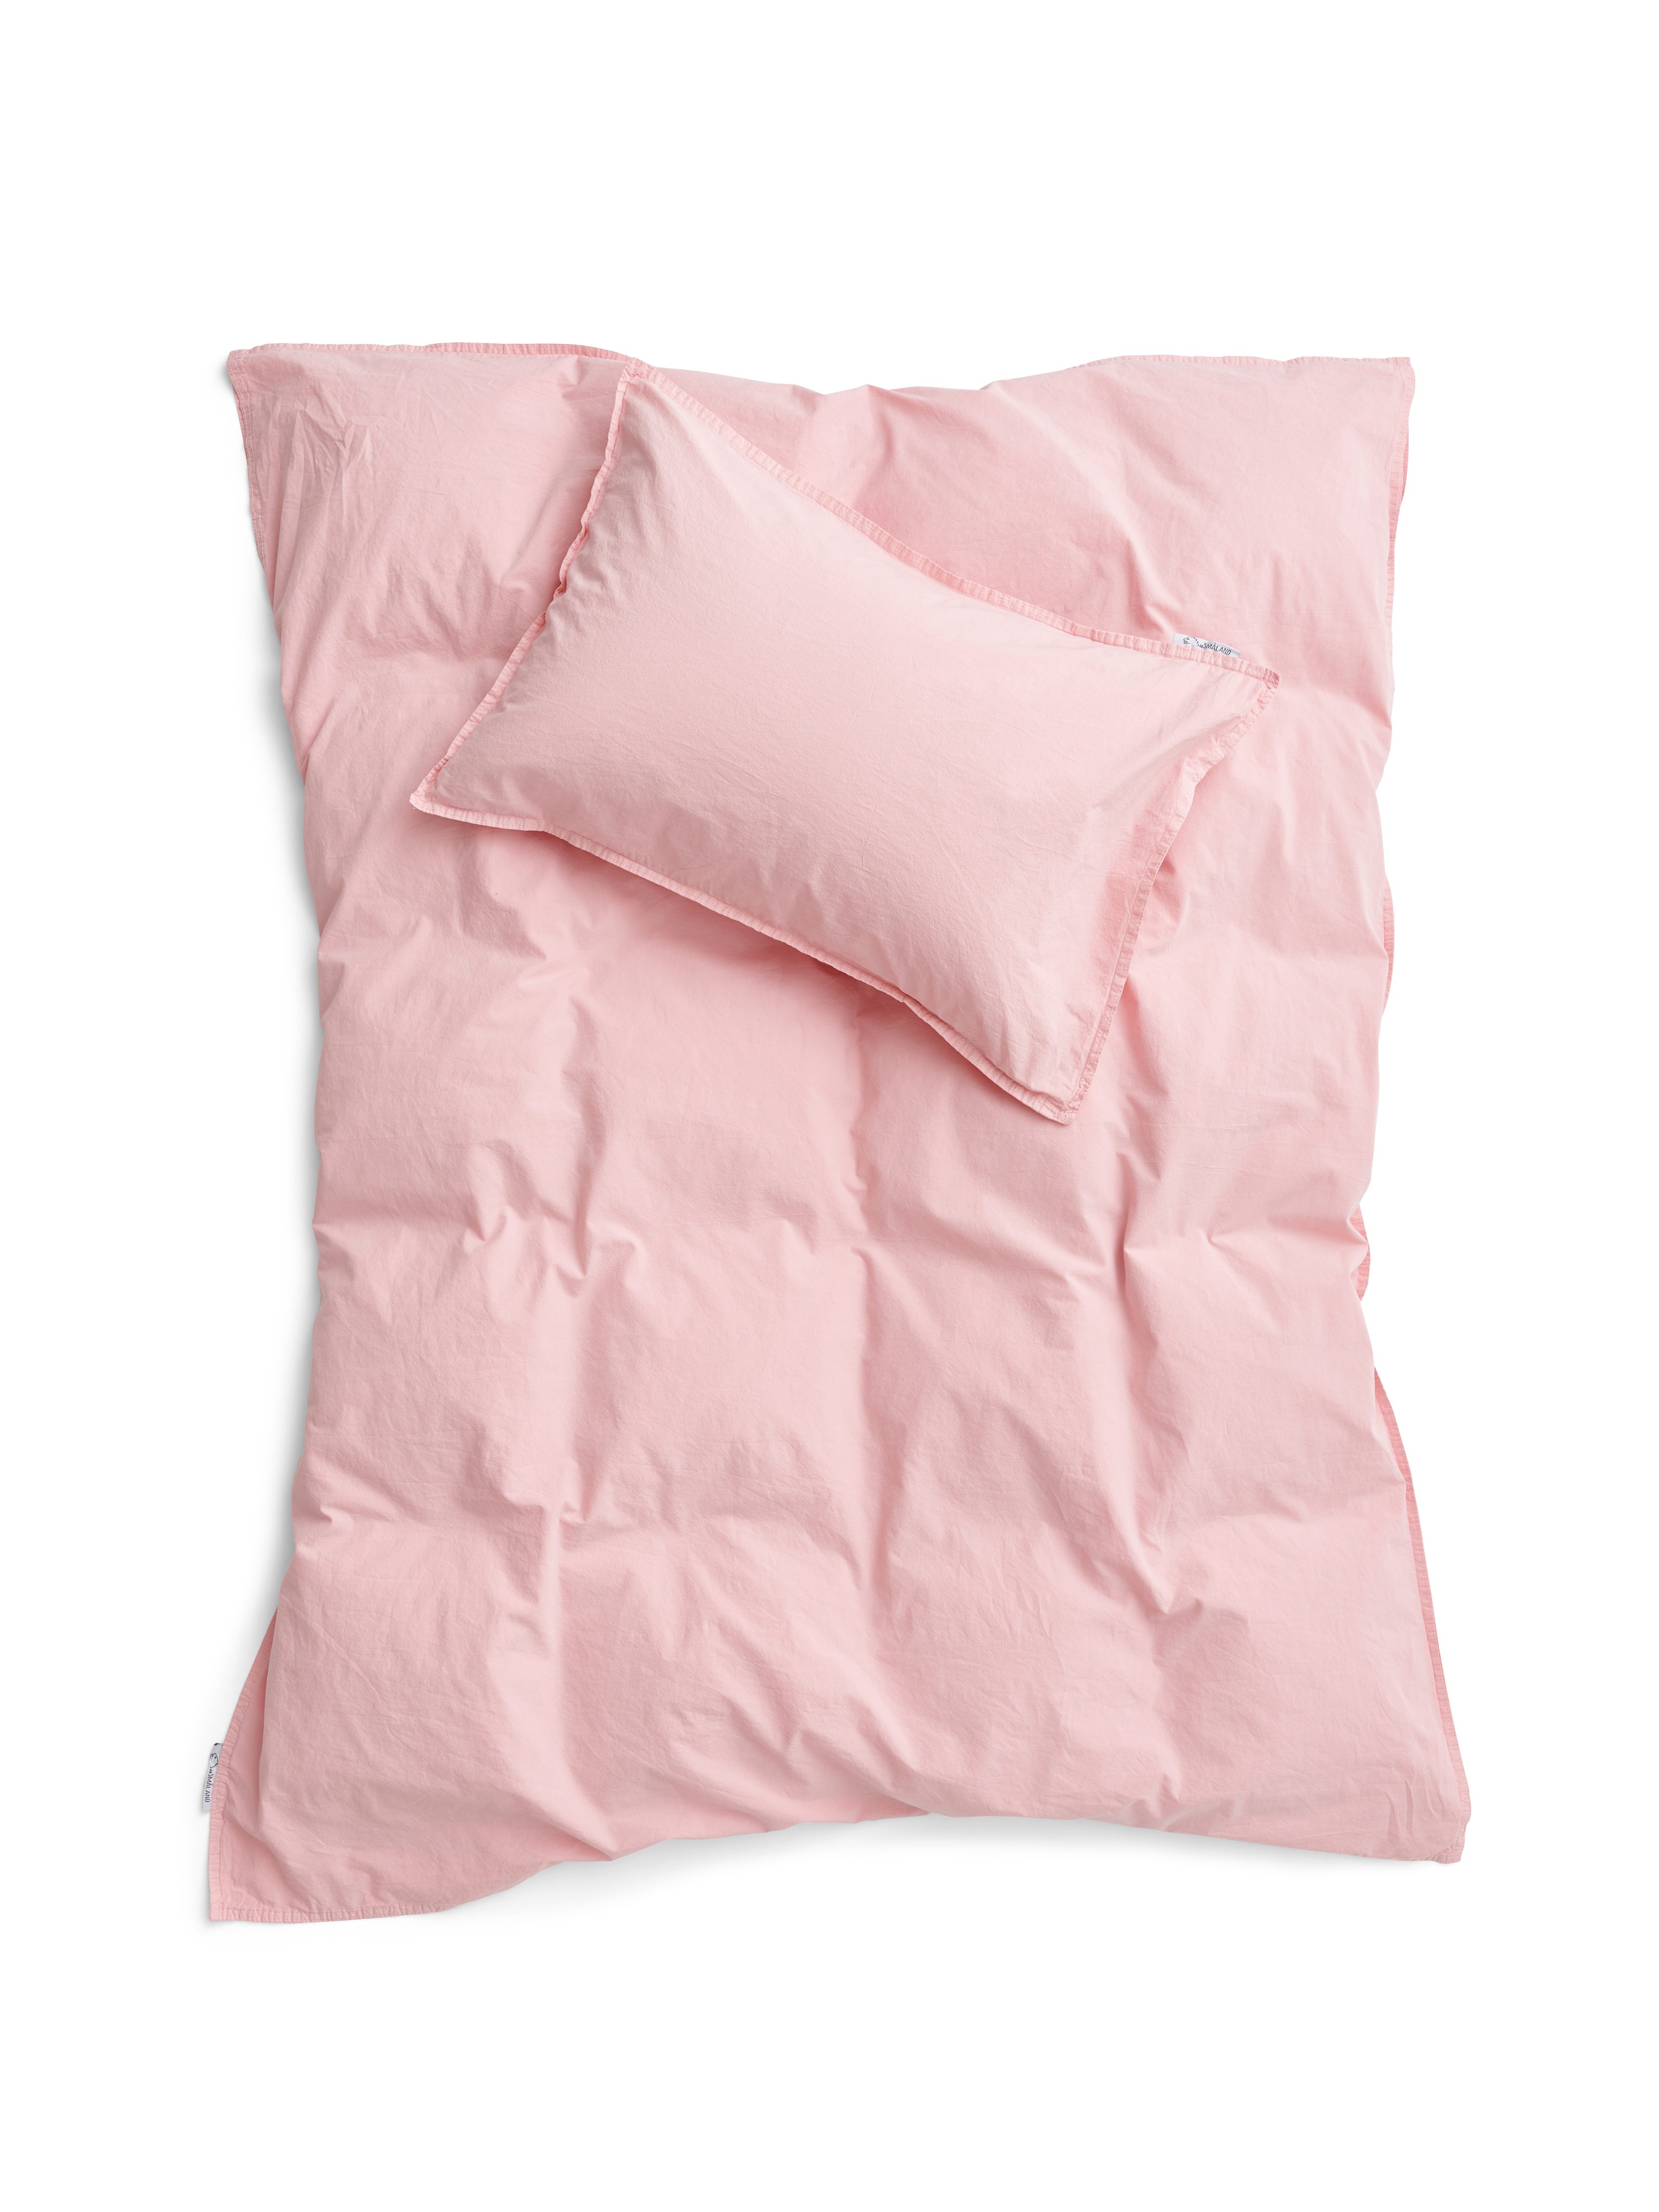 Baby Duvet Cover Crinkle Blush Pink Ab Smaland